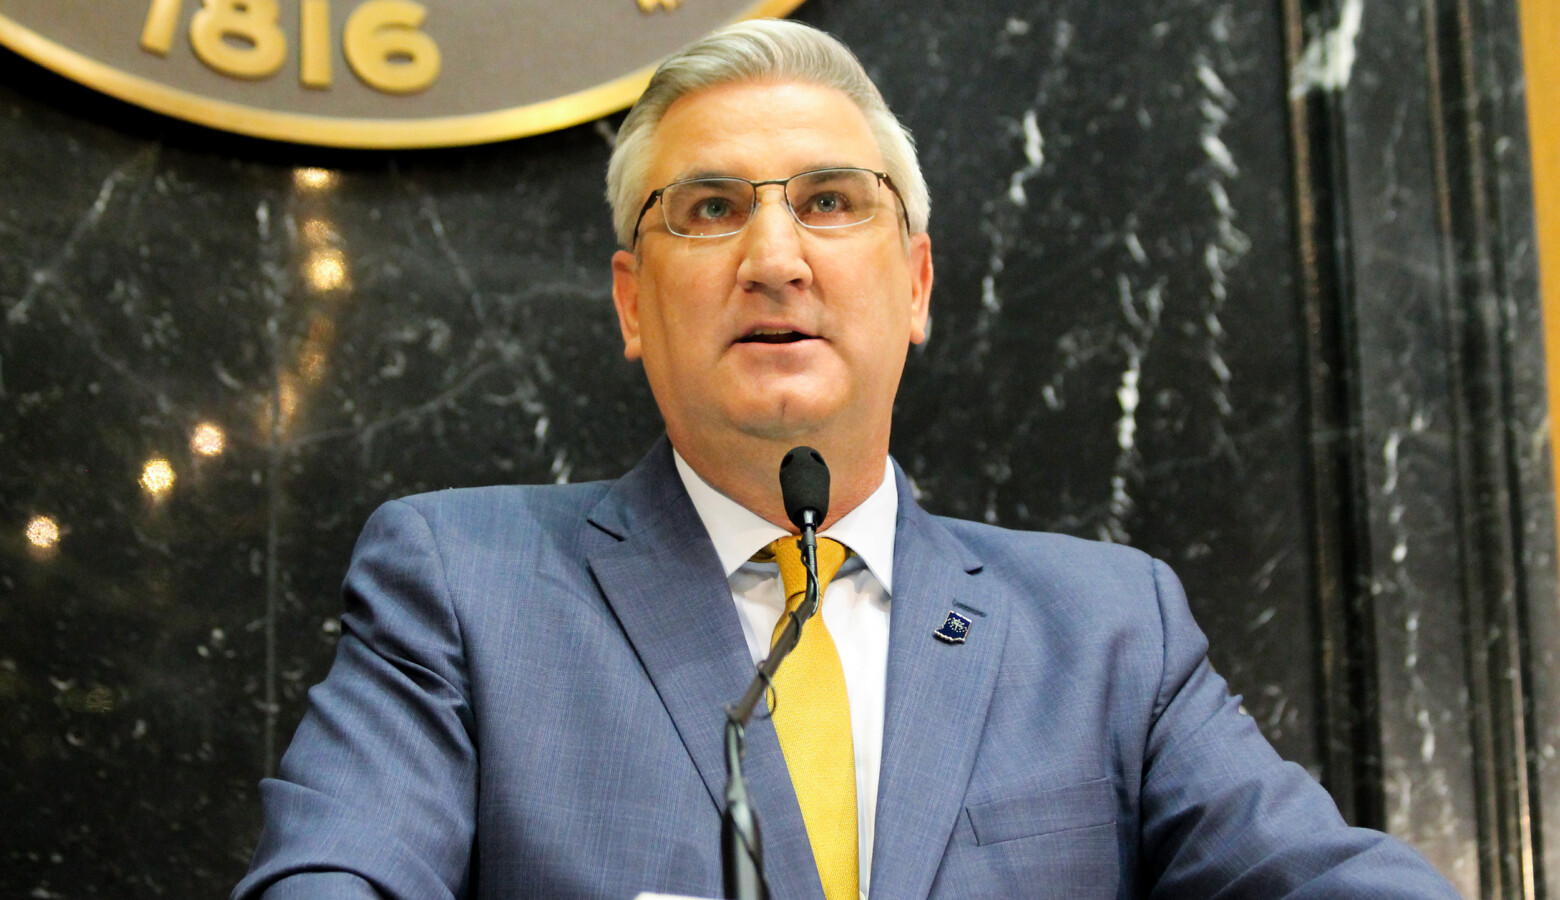 Holcomb said in a statement he "fully expects" additional steps will be needed to prevent the spread of COVID-19. (FILE PHOTO: Lauren Chapman/IPB News)